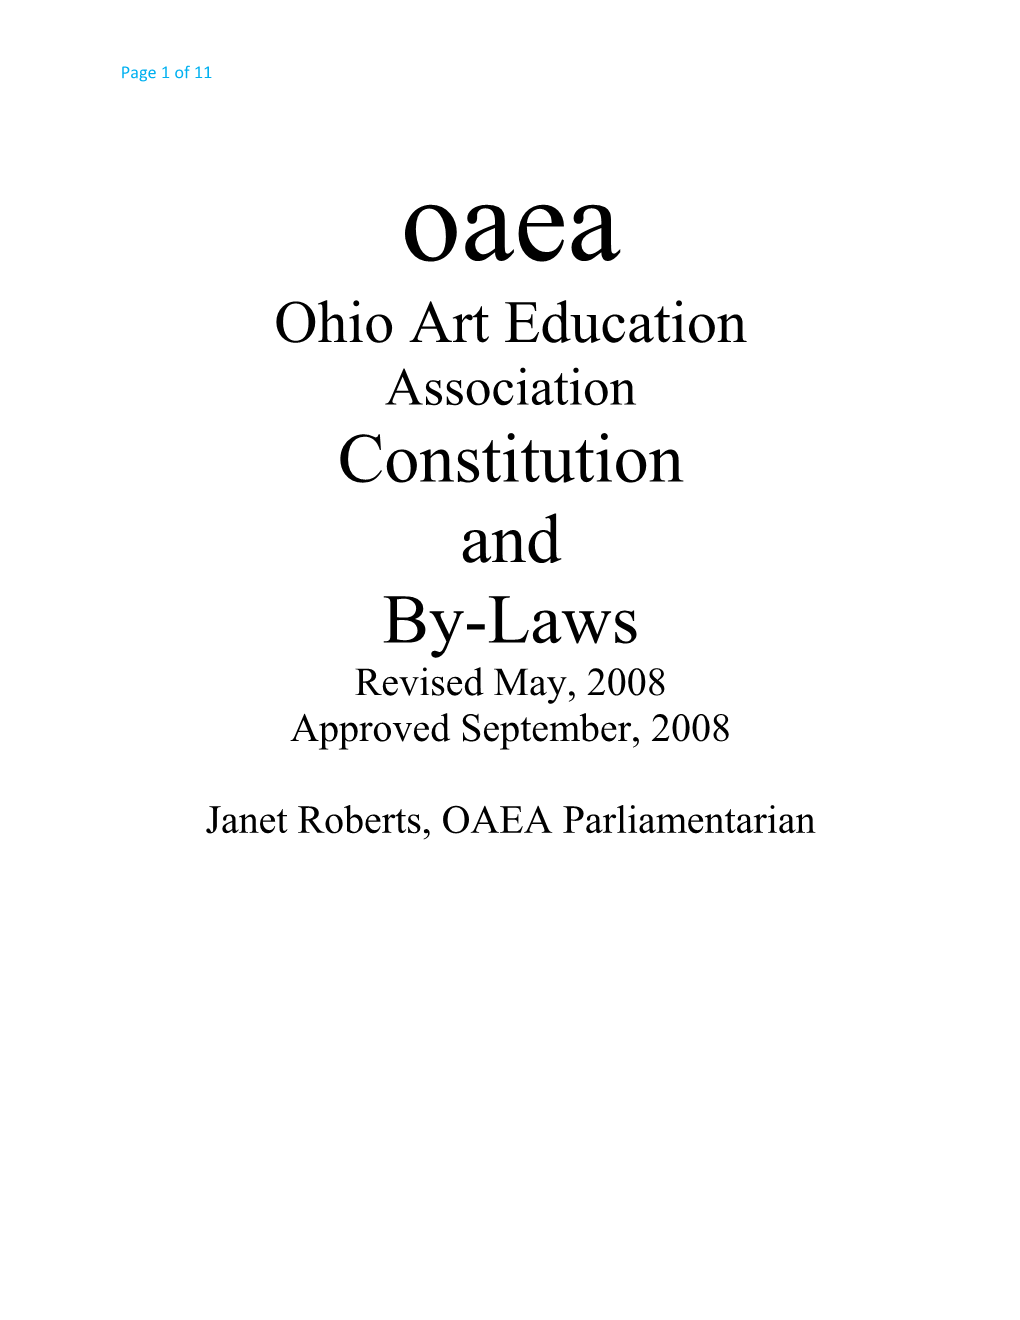 The Organization Shall Be Known As the Ohio Art Education Association